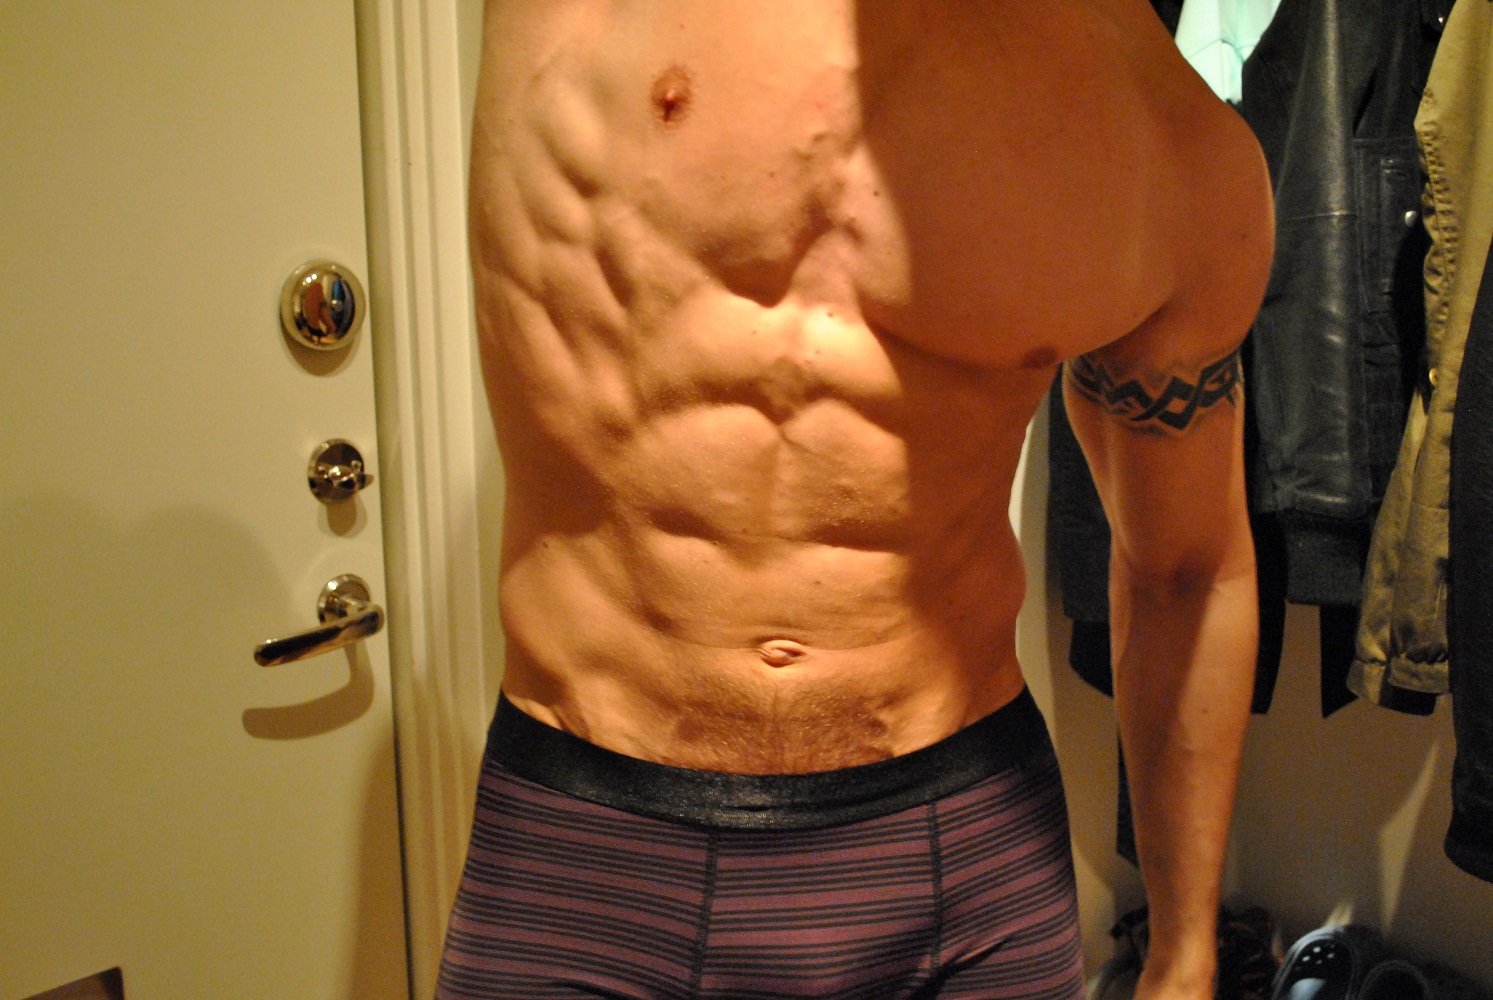 Intermittent+Fasting+Leangains+Athletic+Fitness+1+Week+Out+Robert+%282%29.jpg